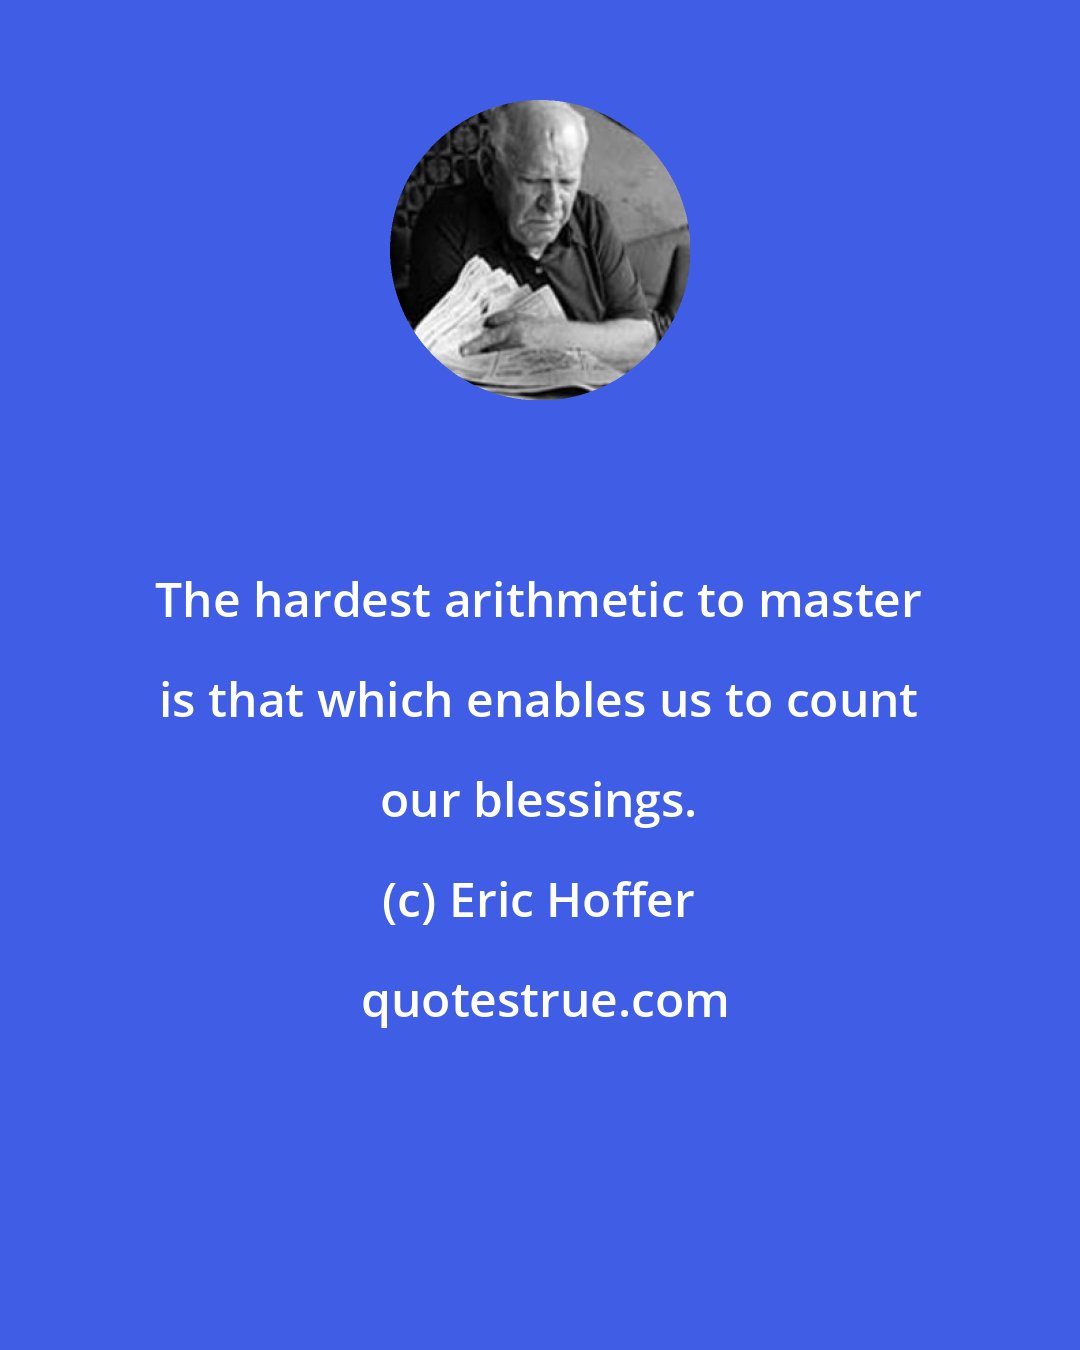 Eric Hoffer: The hardest arithmetic to master is that which enables us to count our blessings.